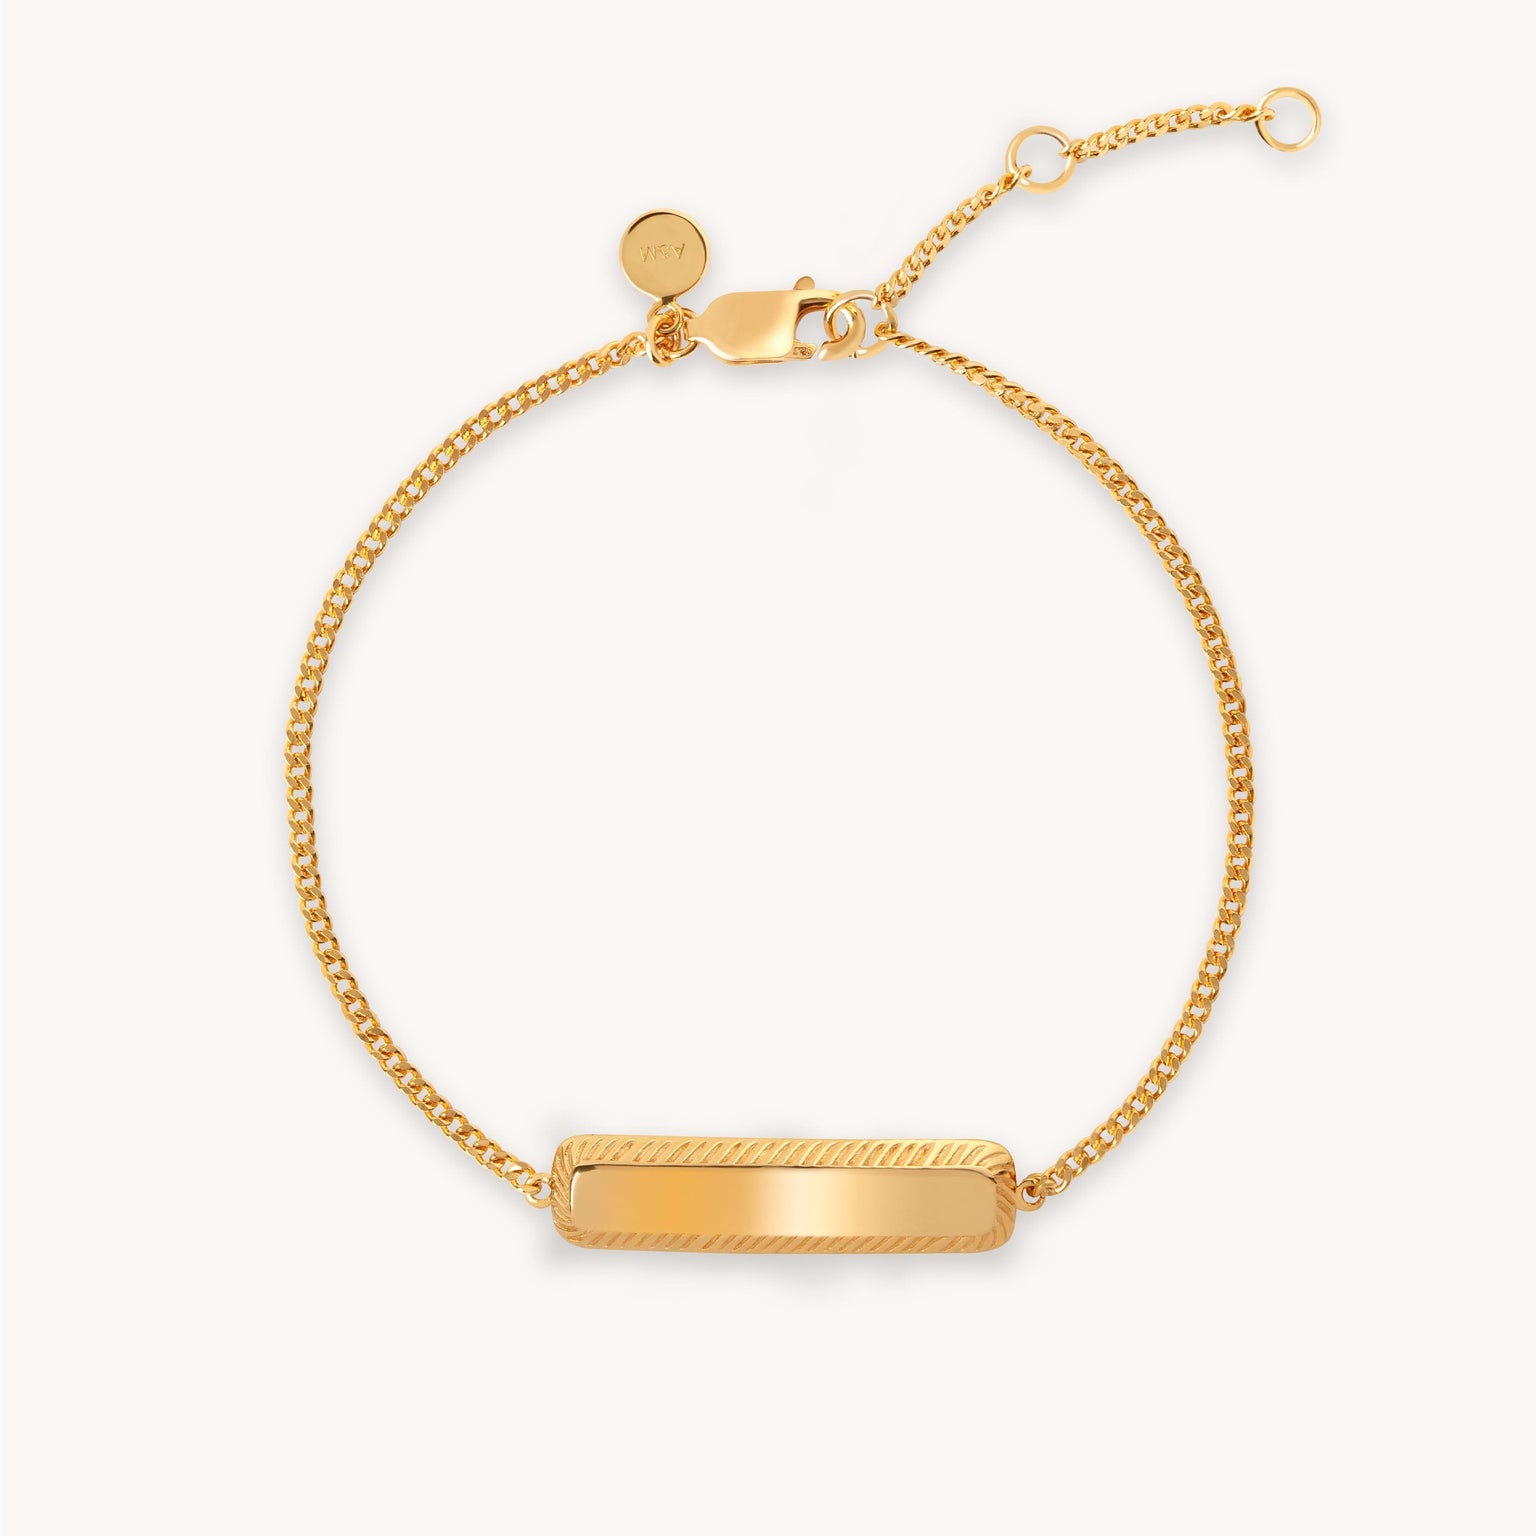 Etched ID Bracelet in Gold